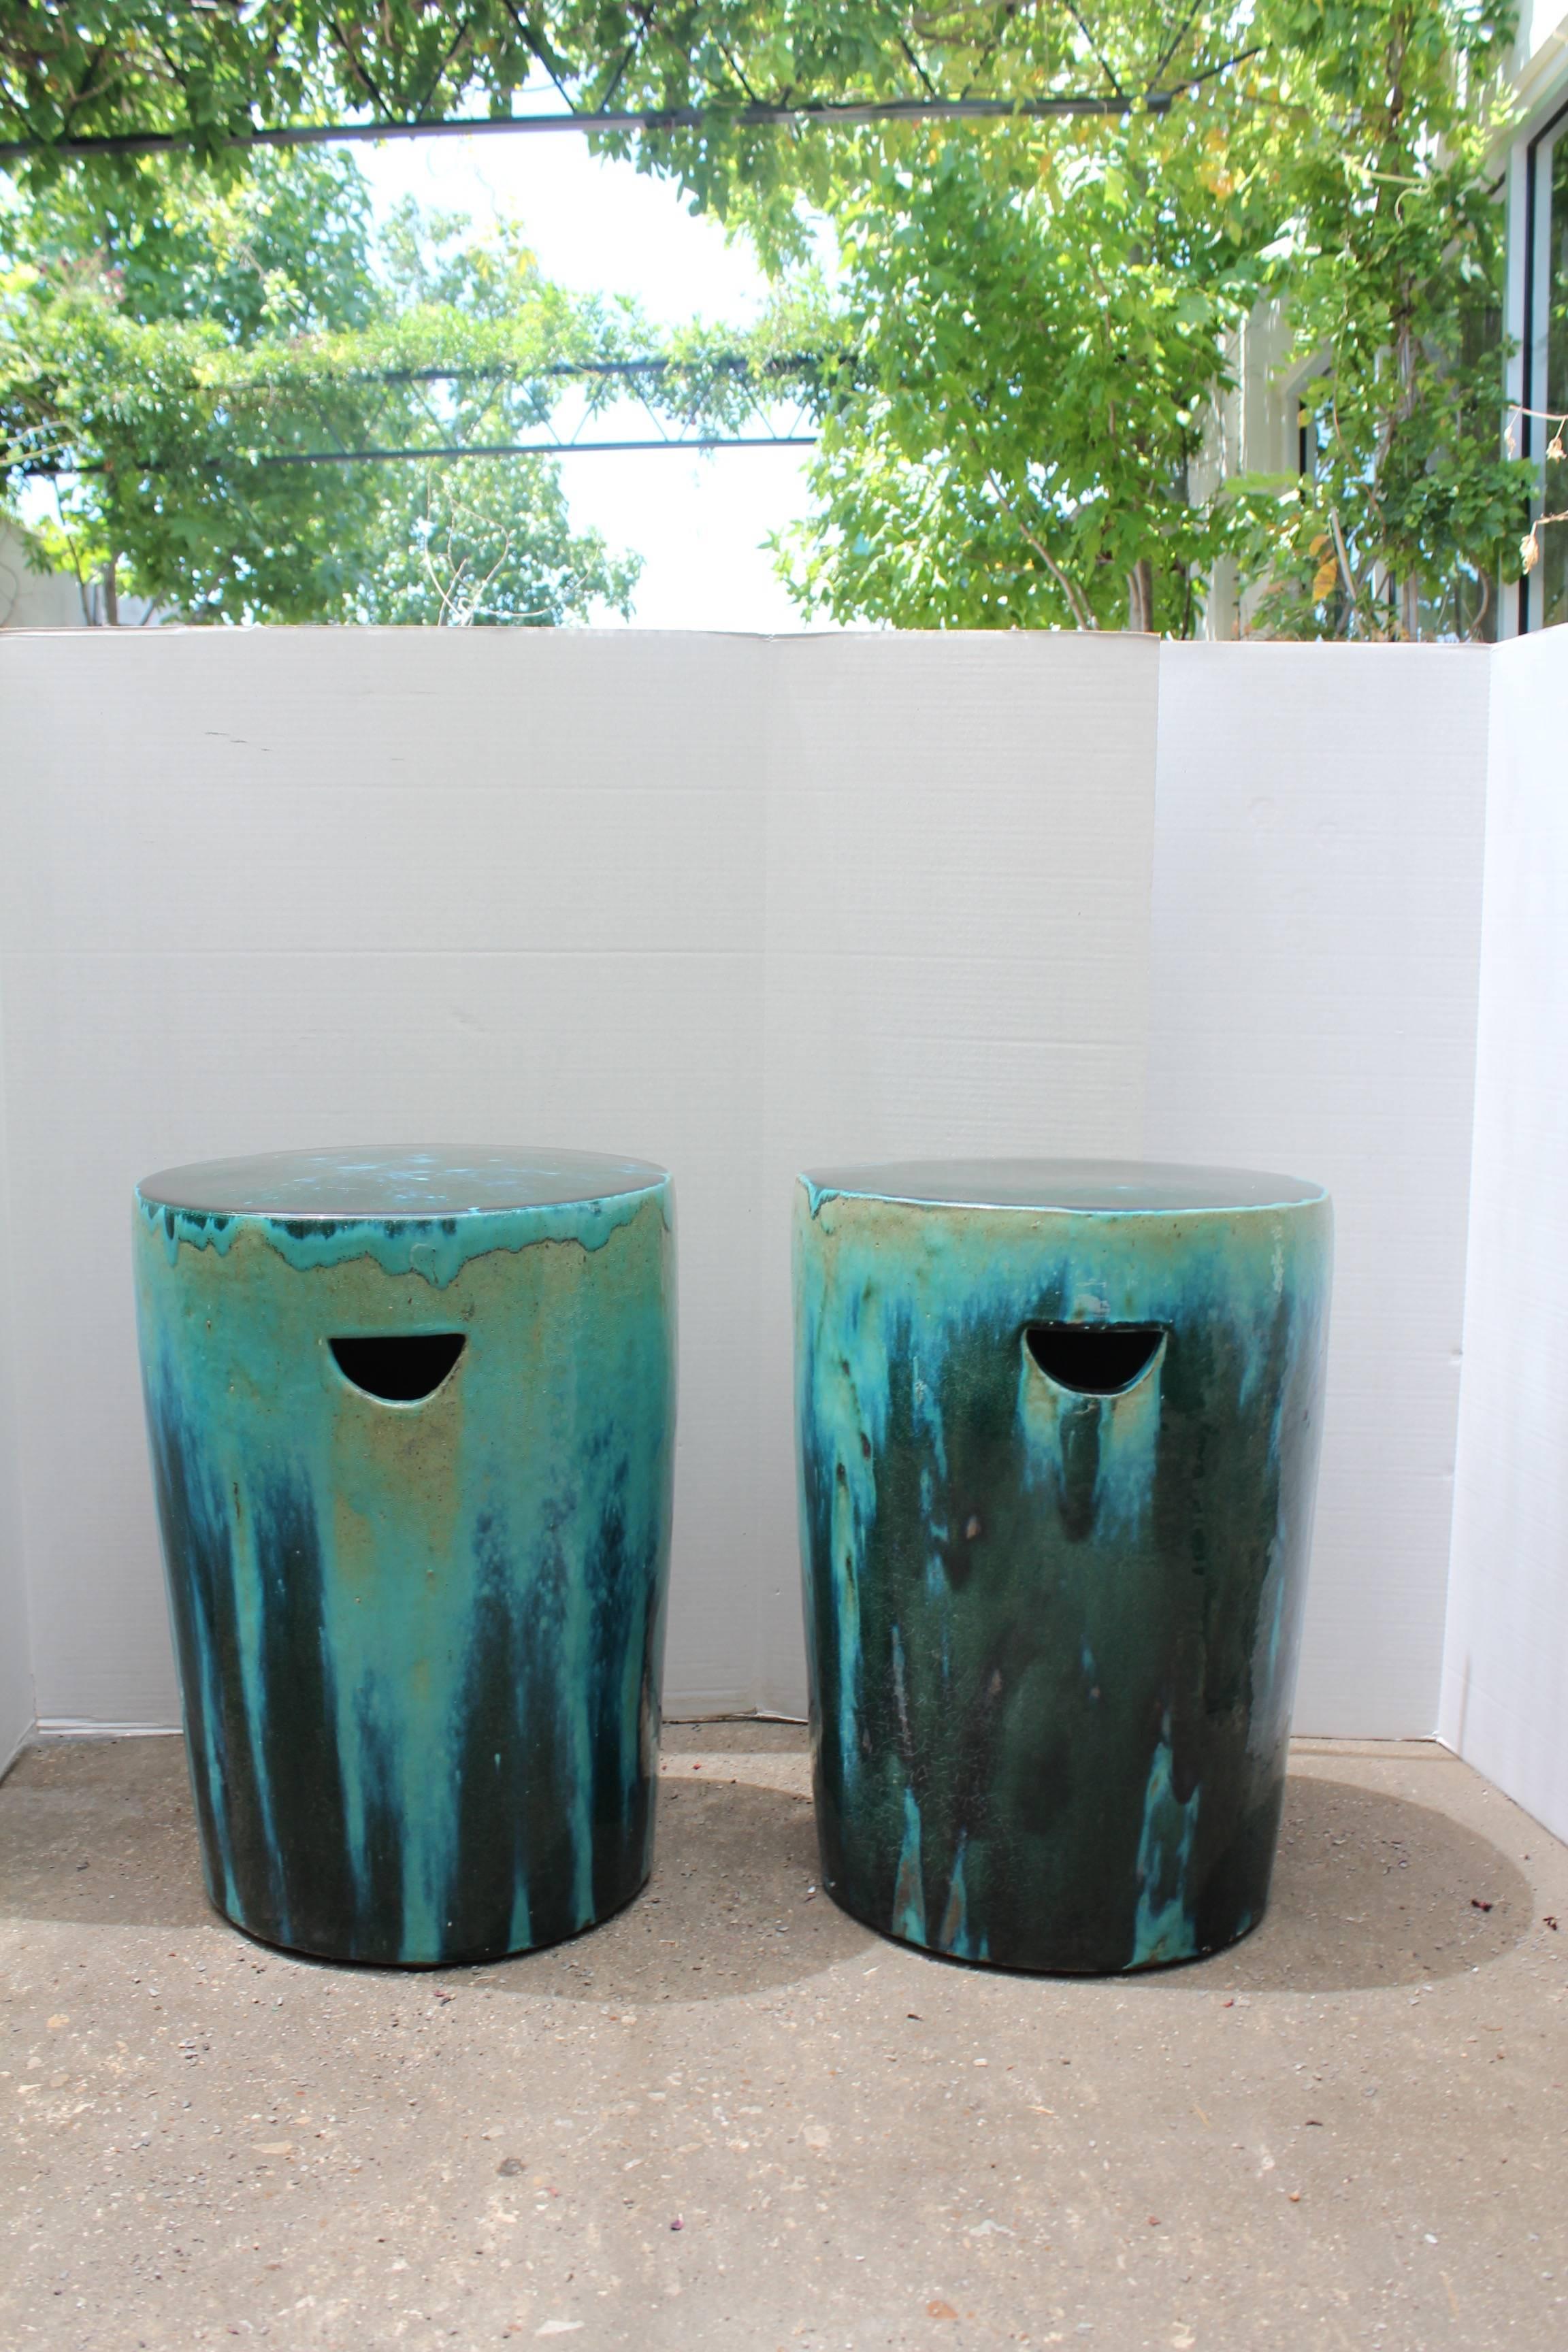 Deep blue and green dipped glazed ceramic garden stools.

Vibrant mixed colors of blue, green and celadon with a dipped glazed effect showing one of a kind beauty.

Can be used indoor or outdoor. Ceramic stools made by hand.
 